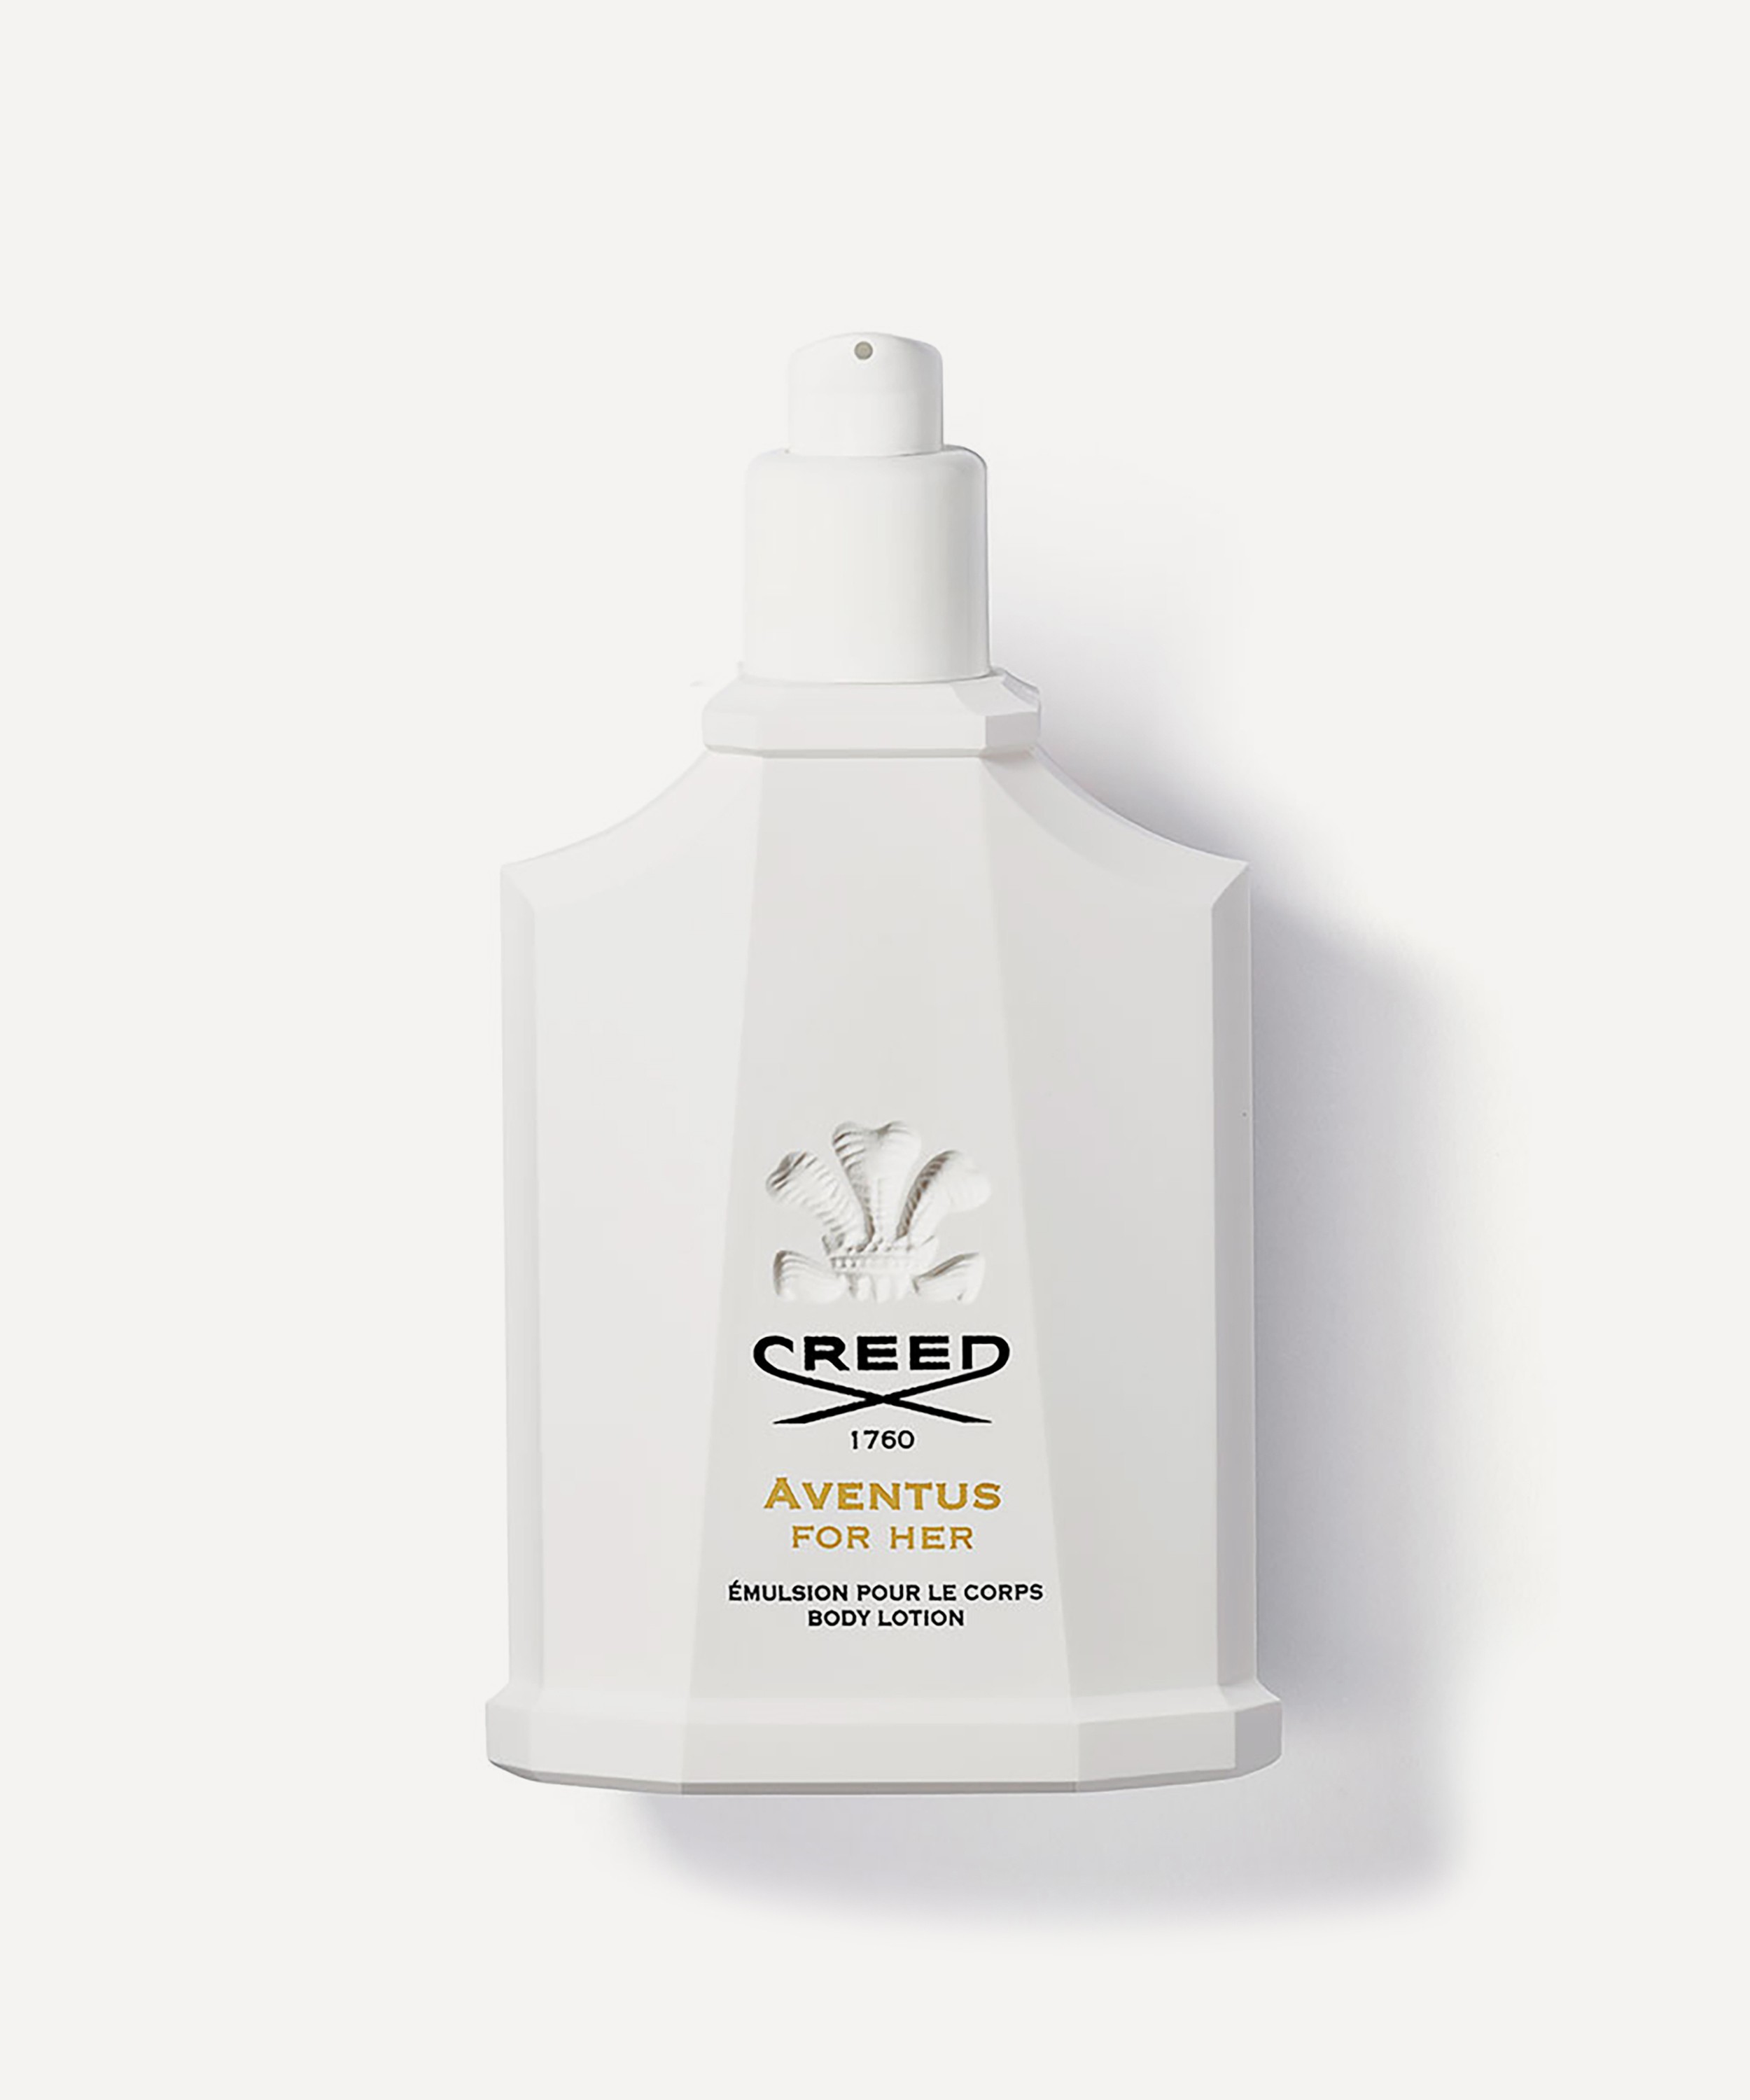 Creed - Aventus for Her Body Lotion 200ml